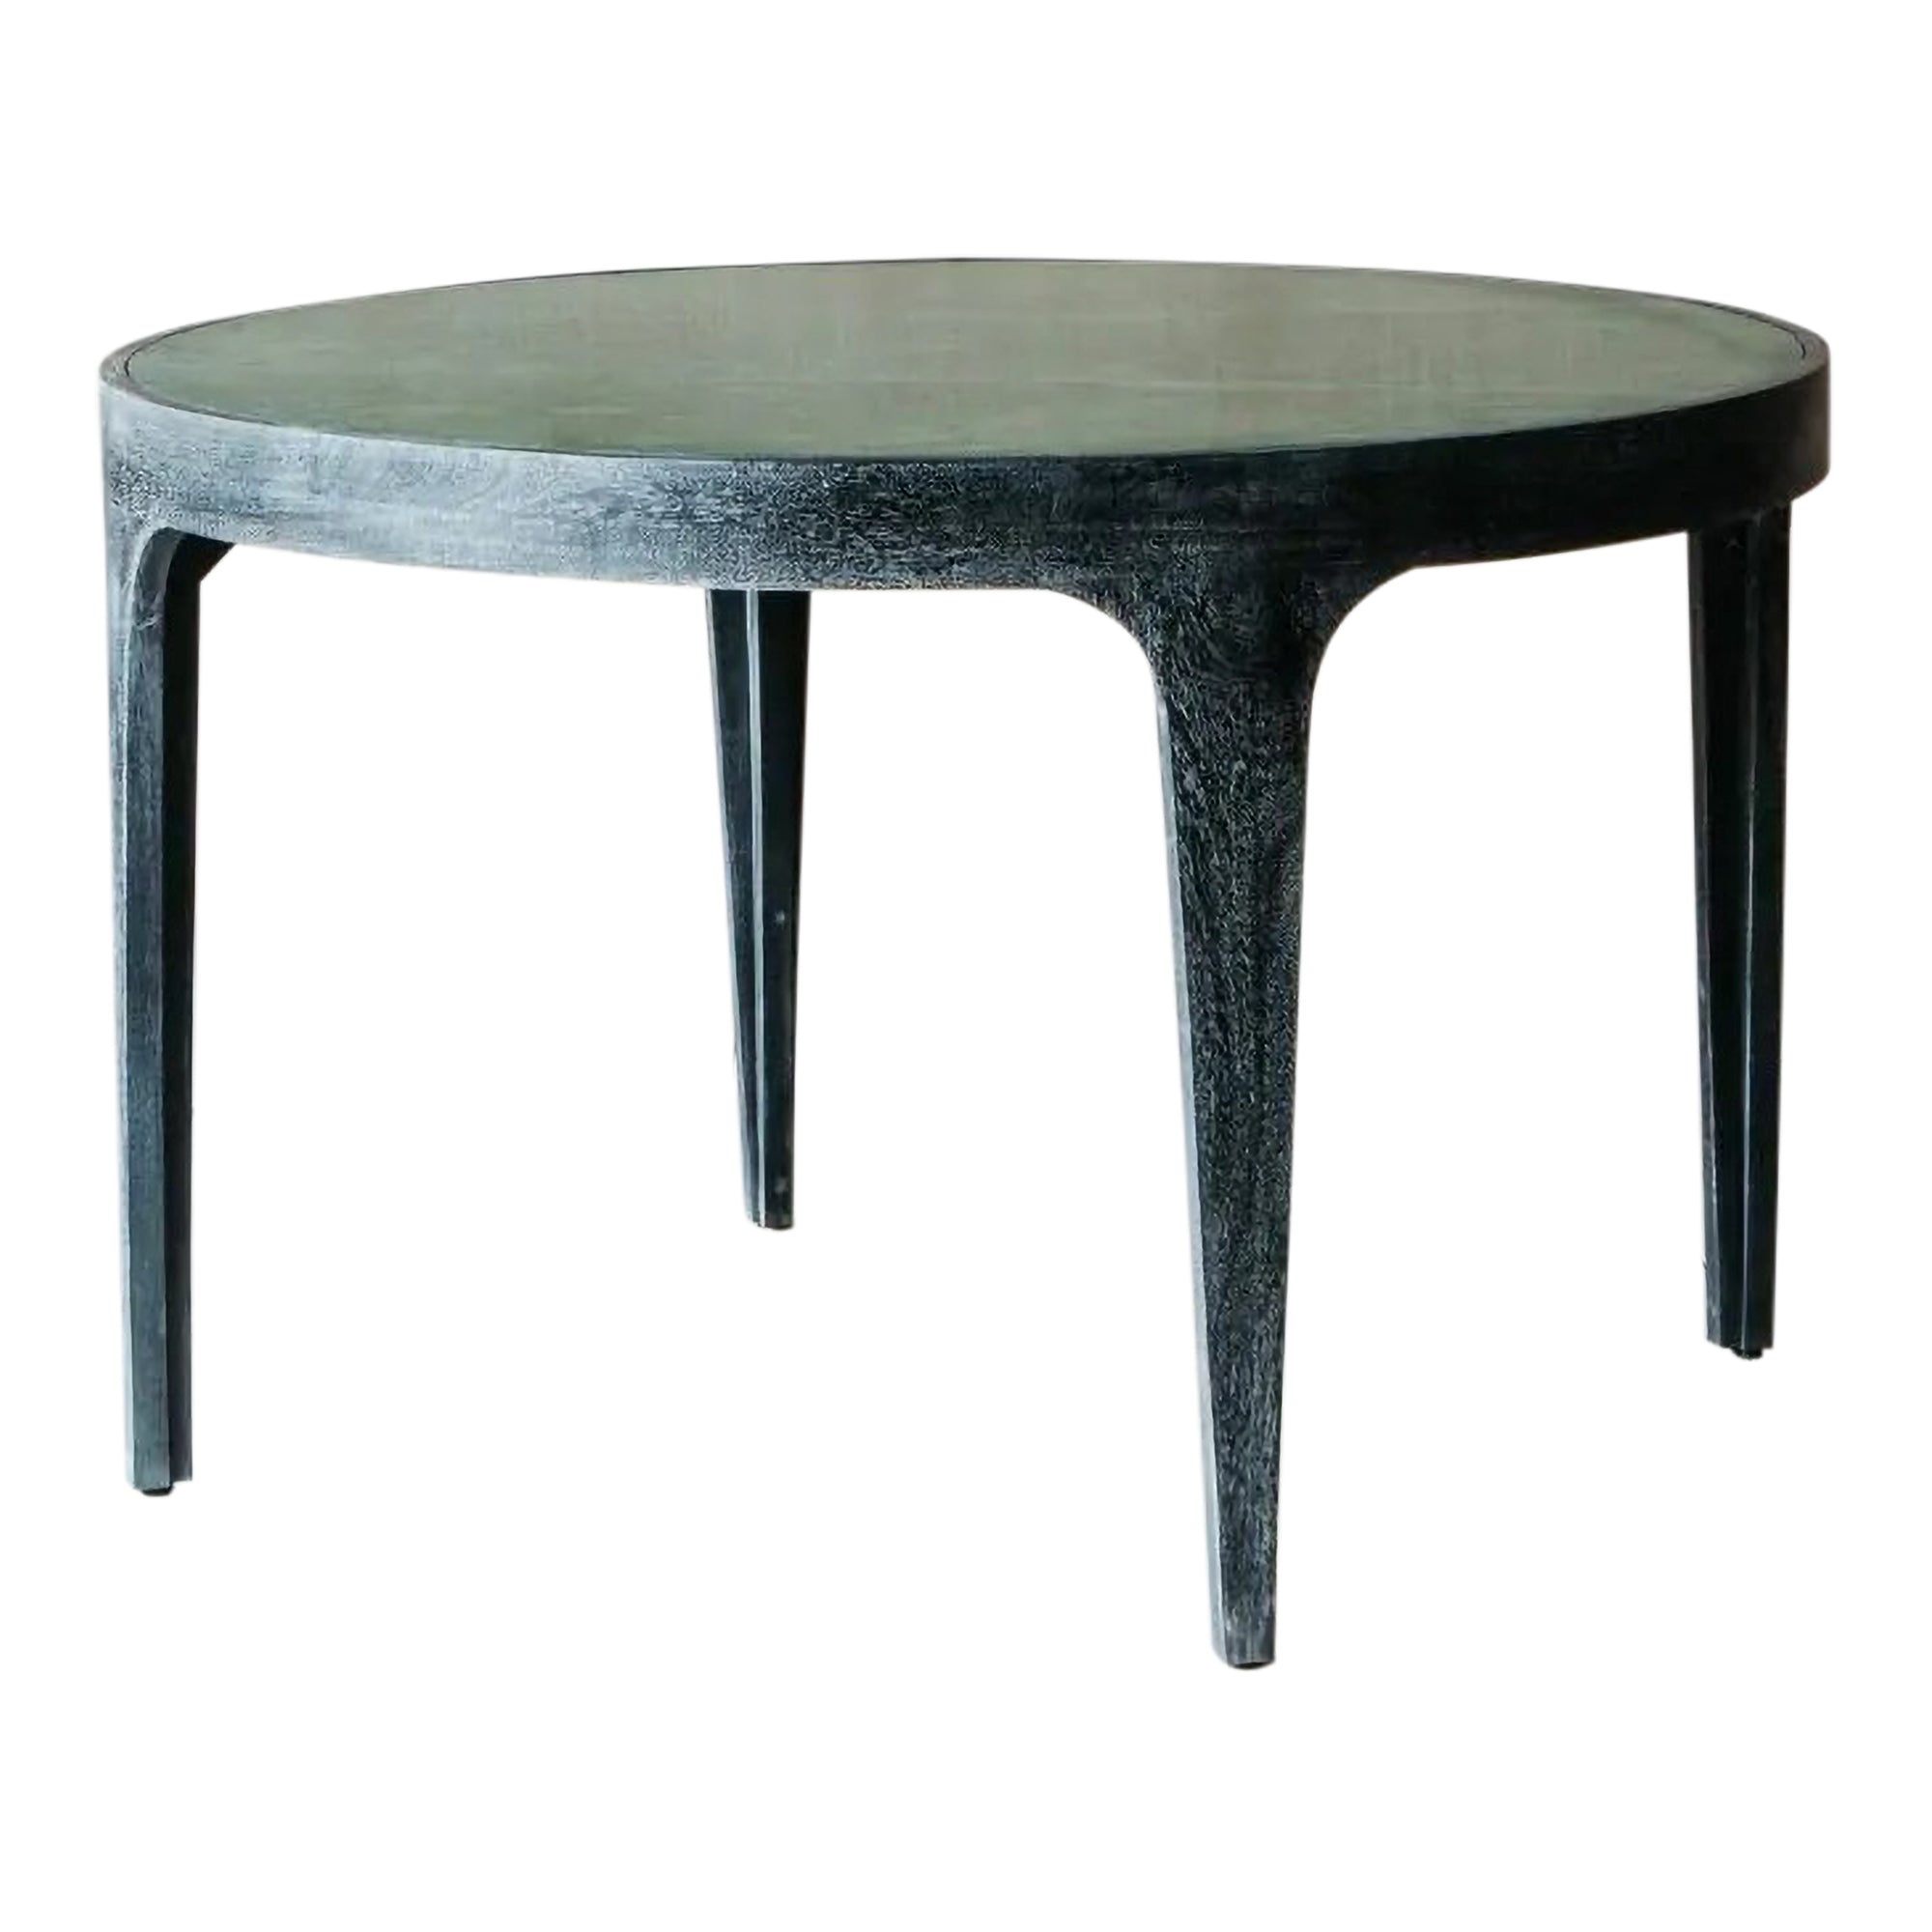 Delaney Four Seater Green Marble Dining Table